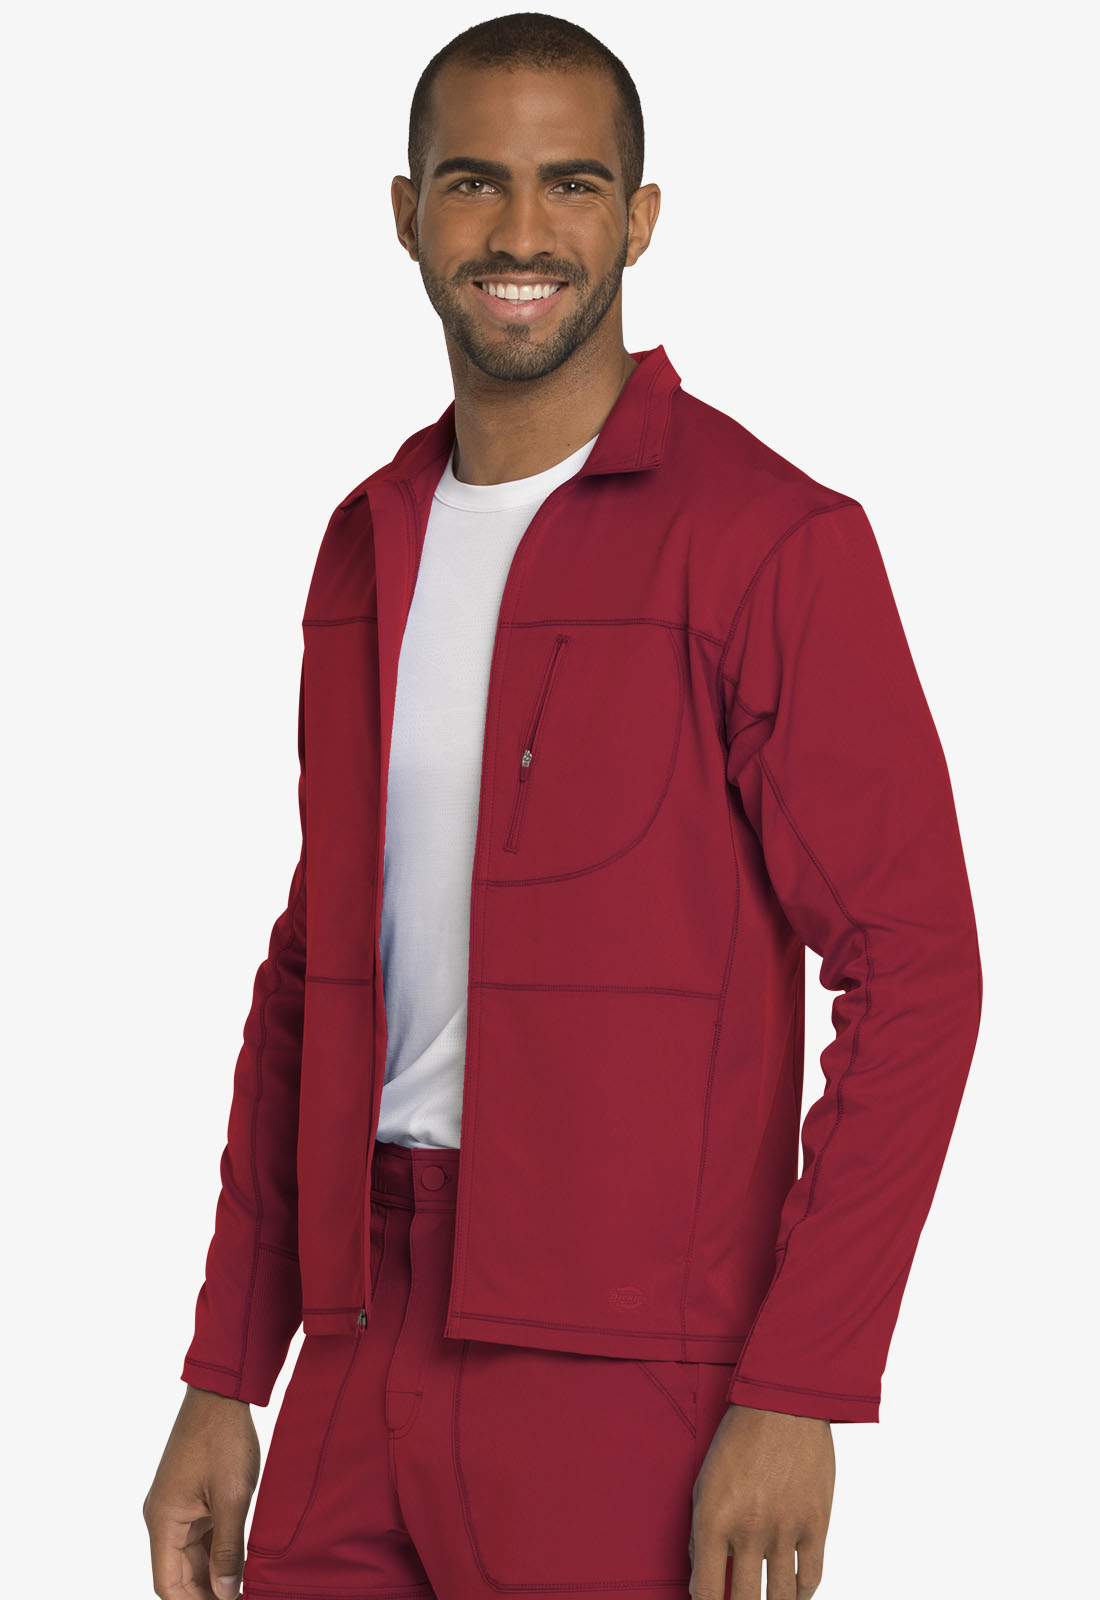 Dickies Dickies Dynamix Men's Zip Front Warm-up Jacket in Red from ...